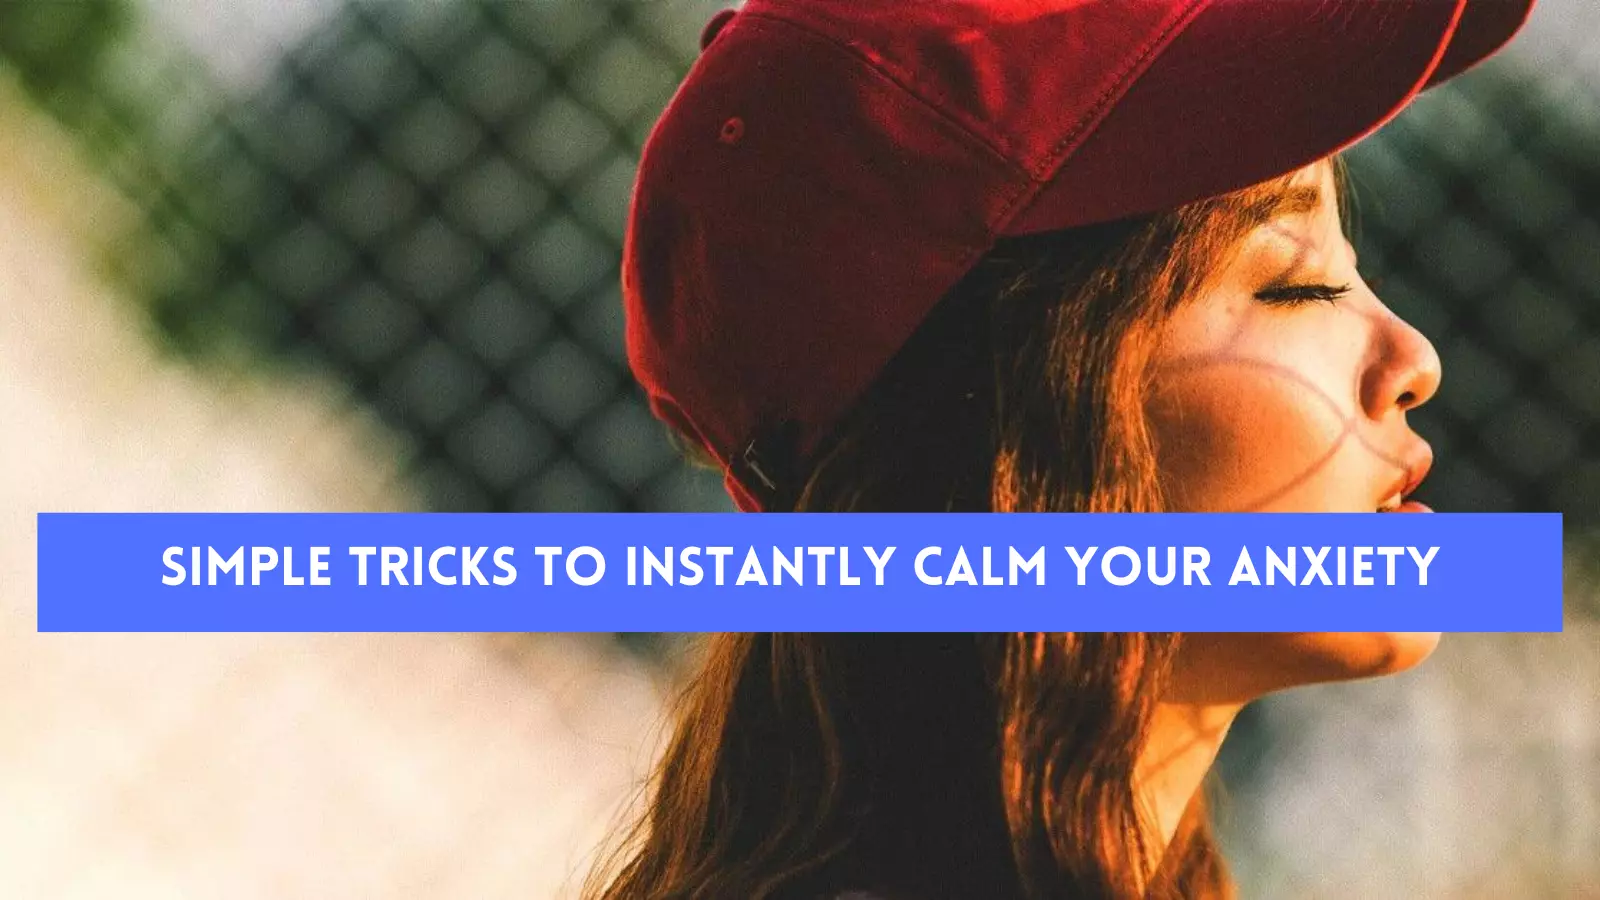 Simple Tricks to Instantly Calm Your Anxiety